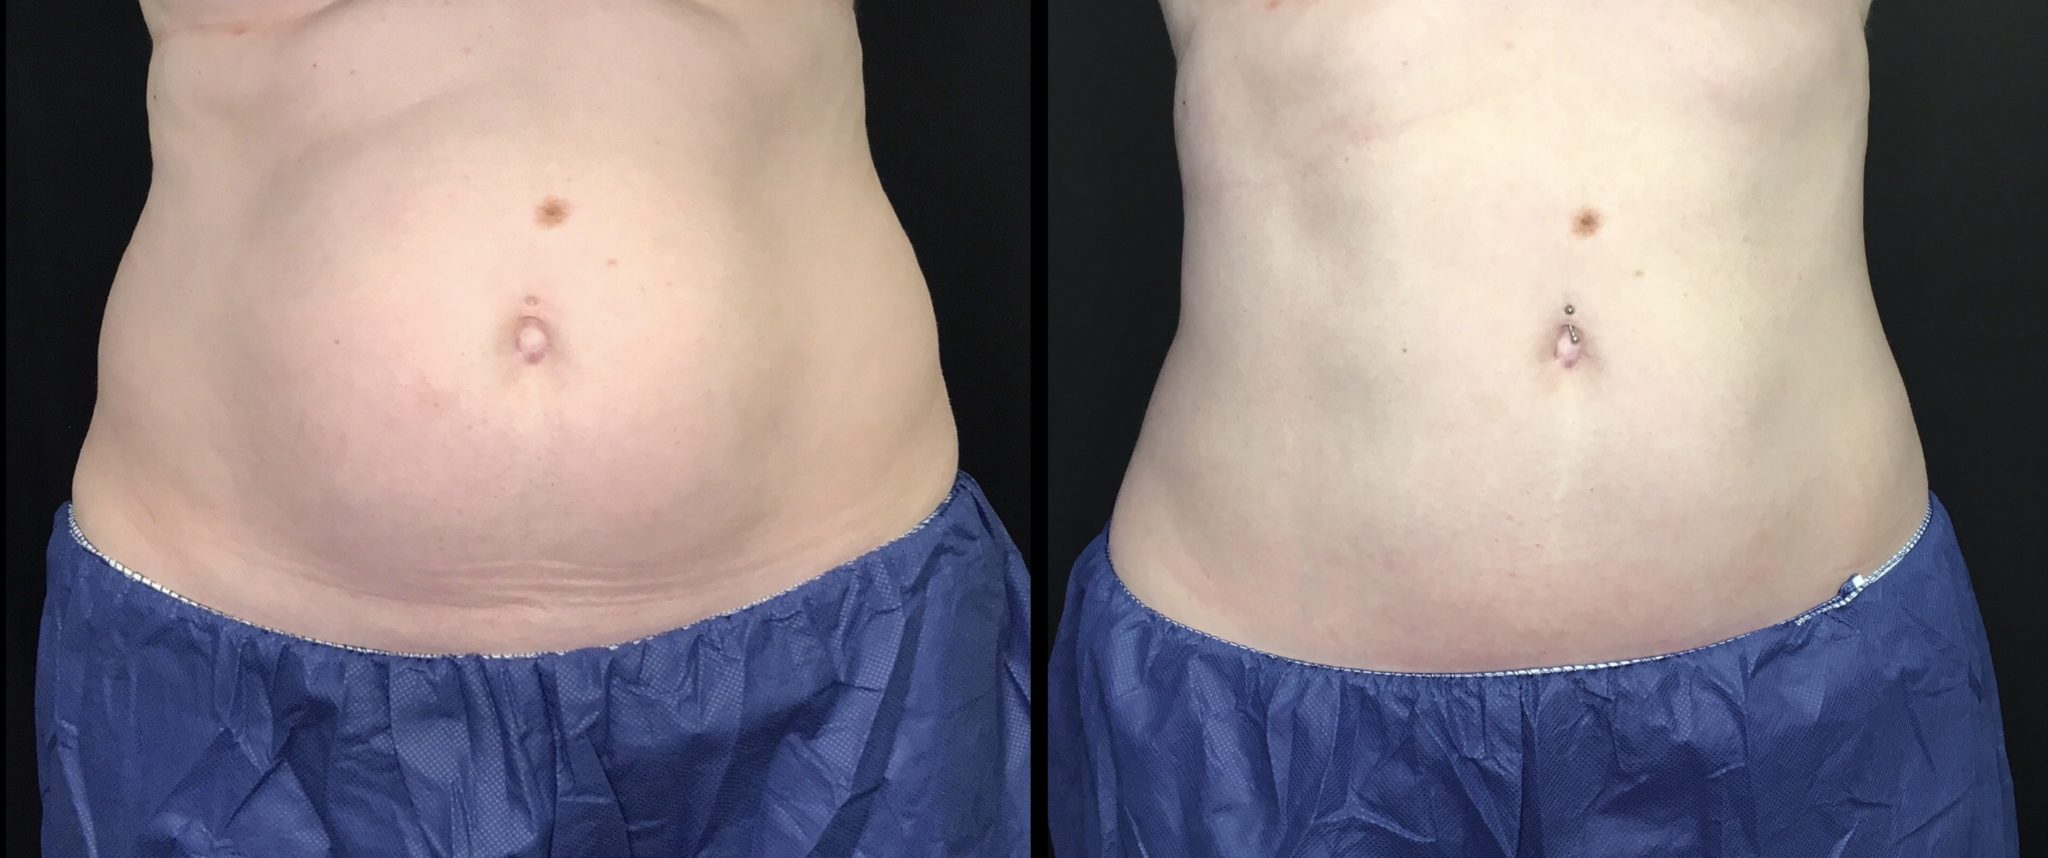 CoolSculpting In Aurora and Denver